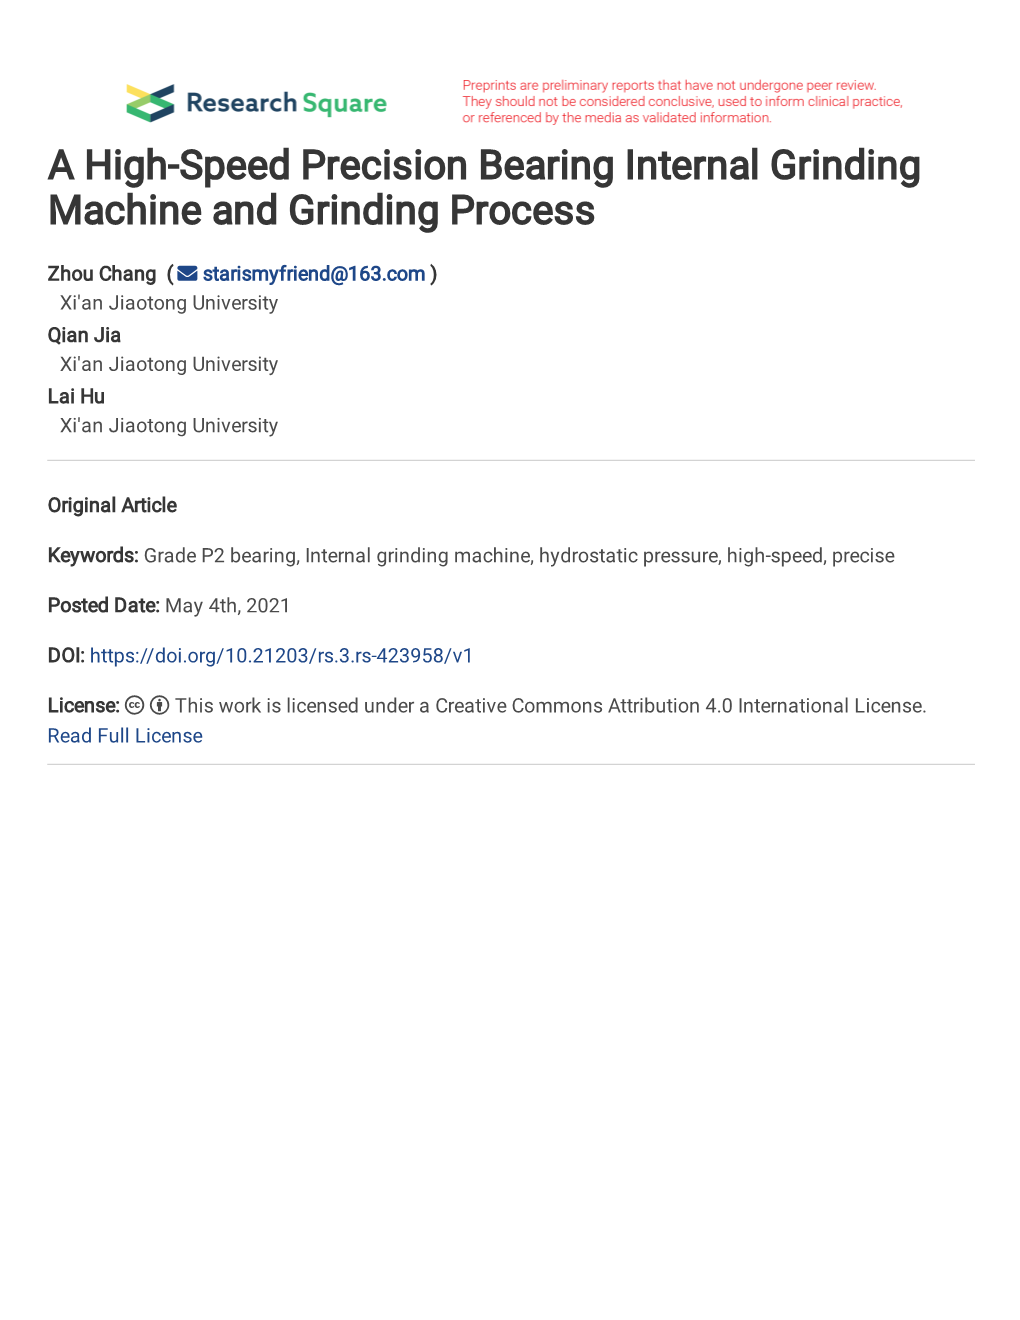 A High-Speed Precision Bearing Internal Grinding Machine and Grinding Process